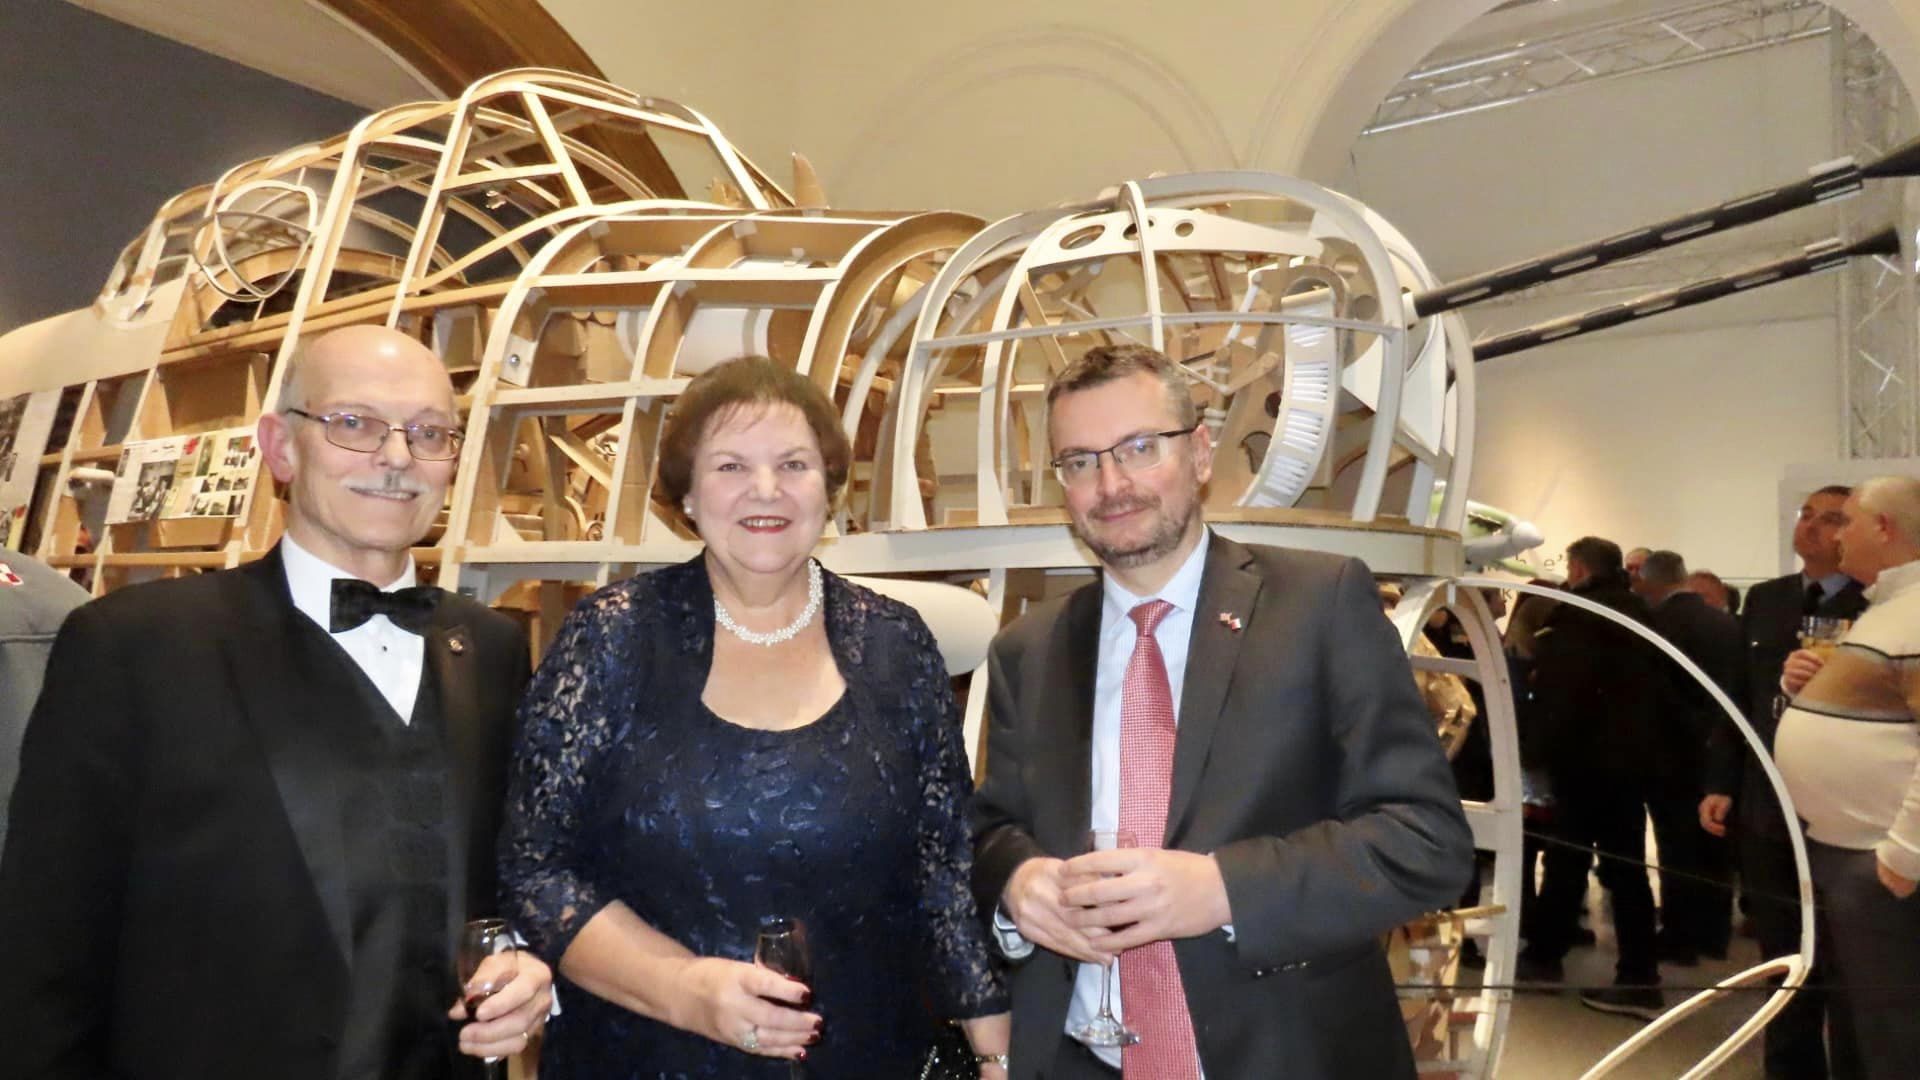 Guests enjoyed the launch night of the new The Many / Paper My Wishes exhibition by artist Suhail Shaikh at the Atkinson in Southport. Richard and Beata Kowalski (Southport Anglo Polish Society); Michal Mazurek (Consulate General of the Republic of Poland in Manchester). 